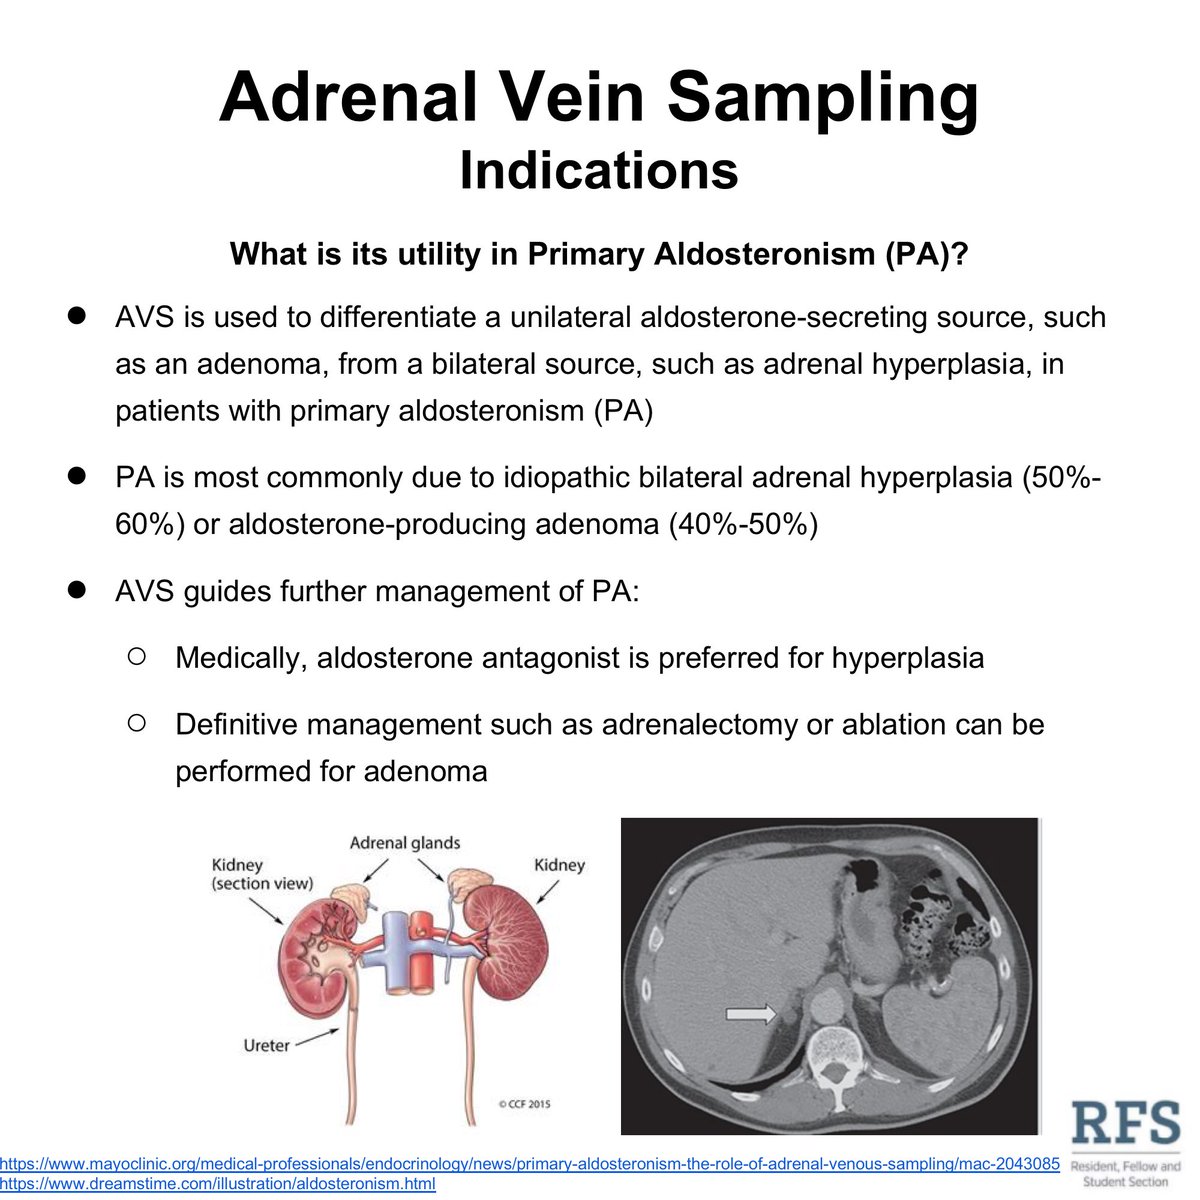 PA is most commonly due to idiopathic bilateral adrenal hyperplasia (50%-60%) or aldosterone-producing adenoma (40%-50%). AVS is is used to differentiate a bilateral source (idiopathic hyperplasia) from a unilateral source (adenoma).